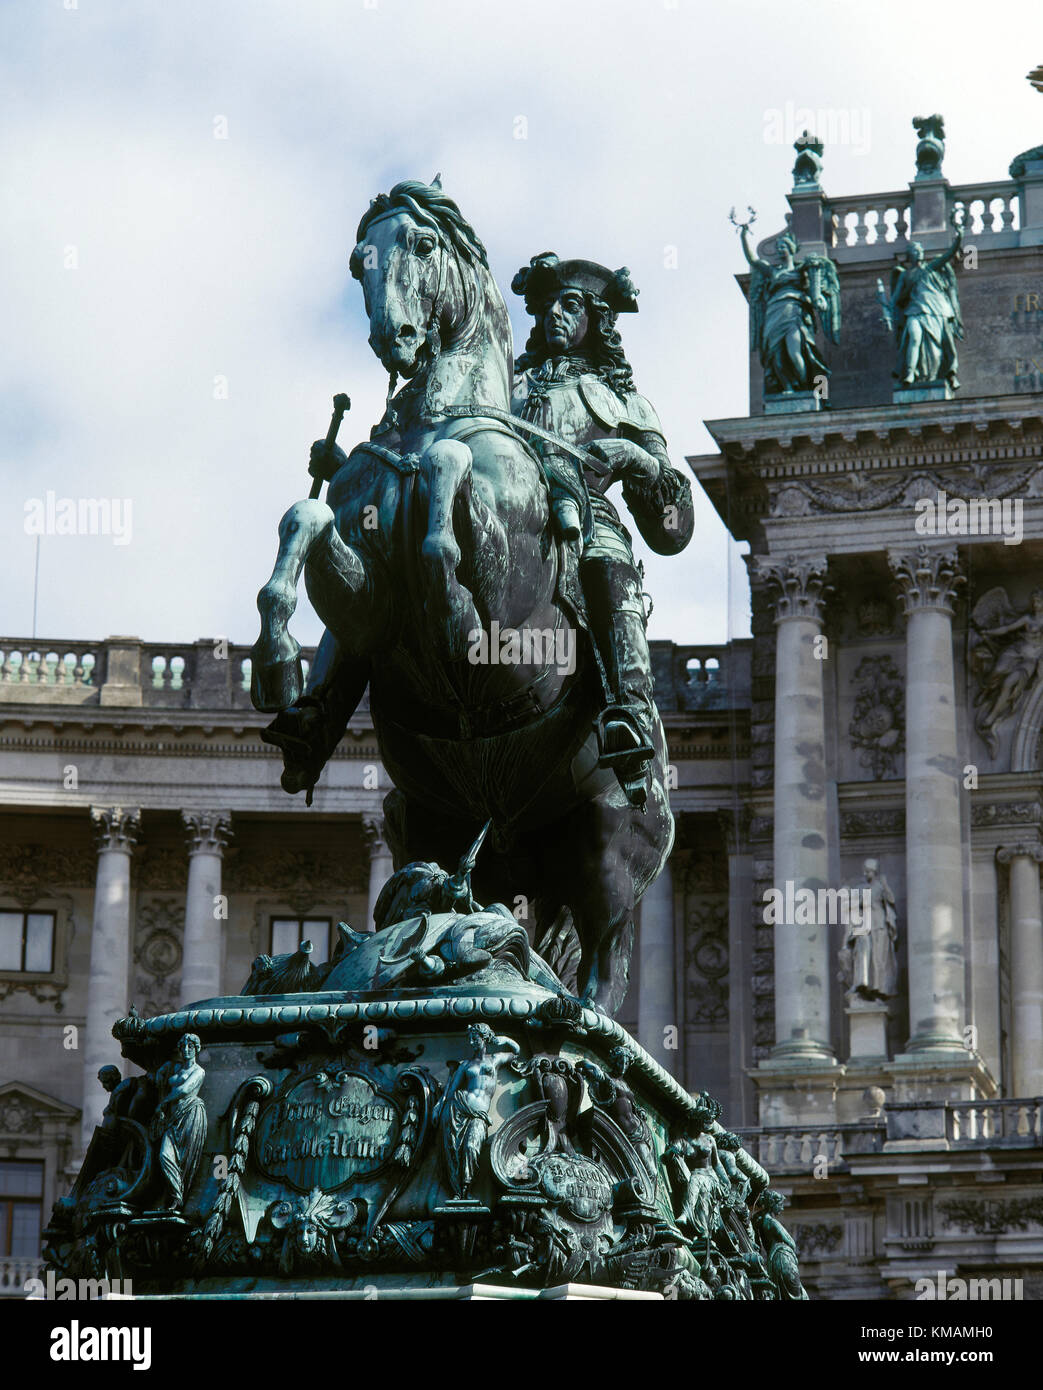 Prince Eugene of Savoy (1663-1736). General of the Holy Roman Empire and the Archduchy of Austria. By German-Austrian sculptor Anton Dominik Fernkorn (1813-1878). Eugen's monument. in Heldenplatz, Vienna, Austria. Stock Photo